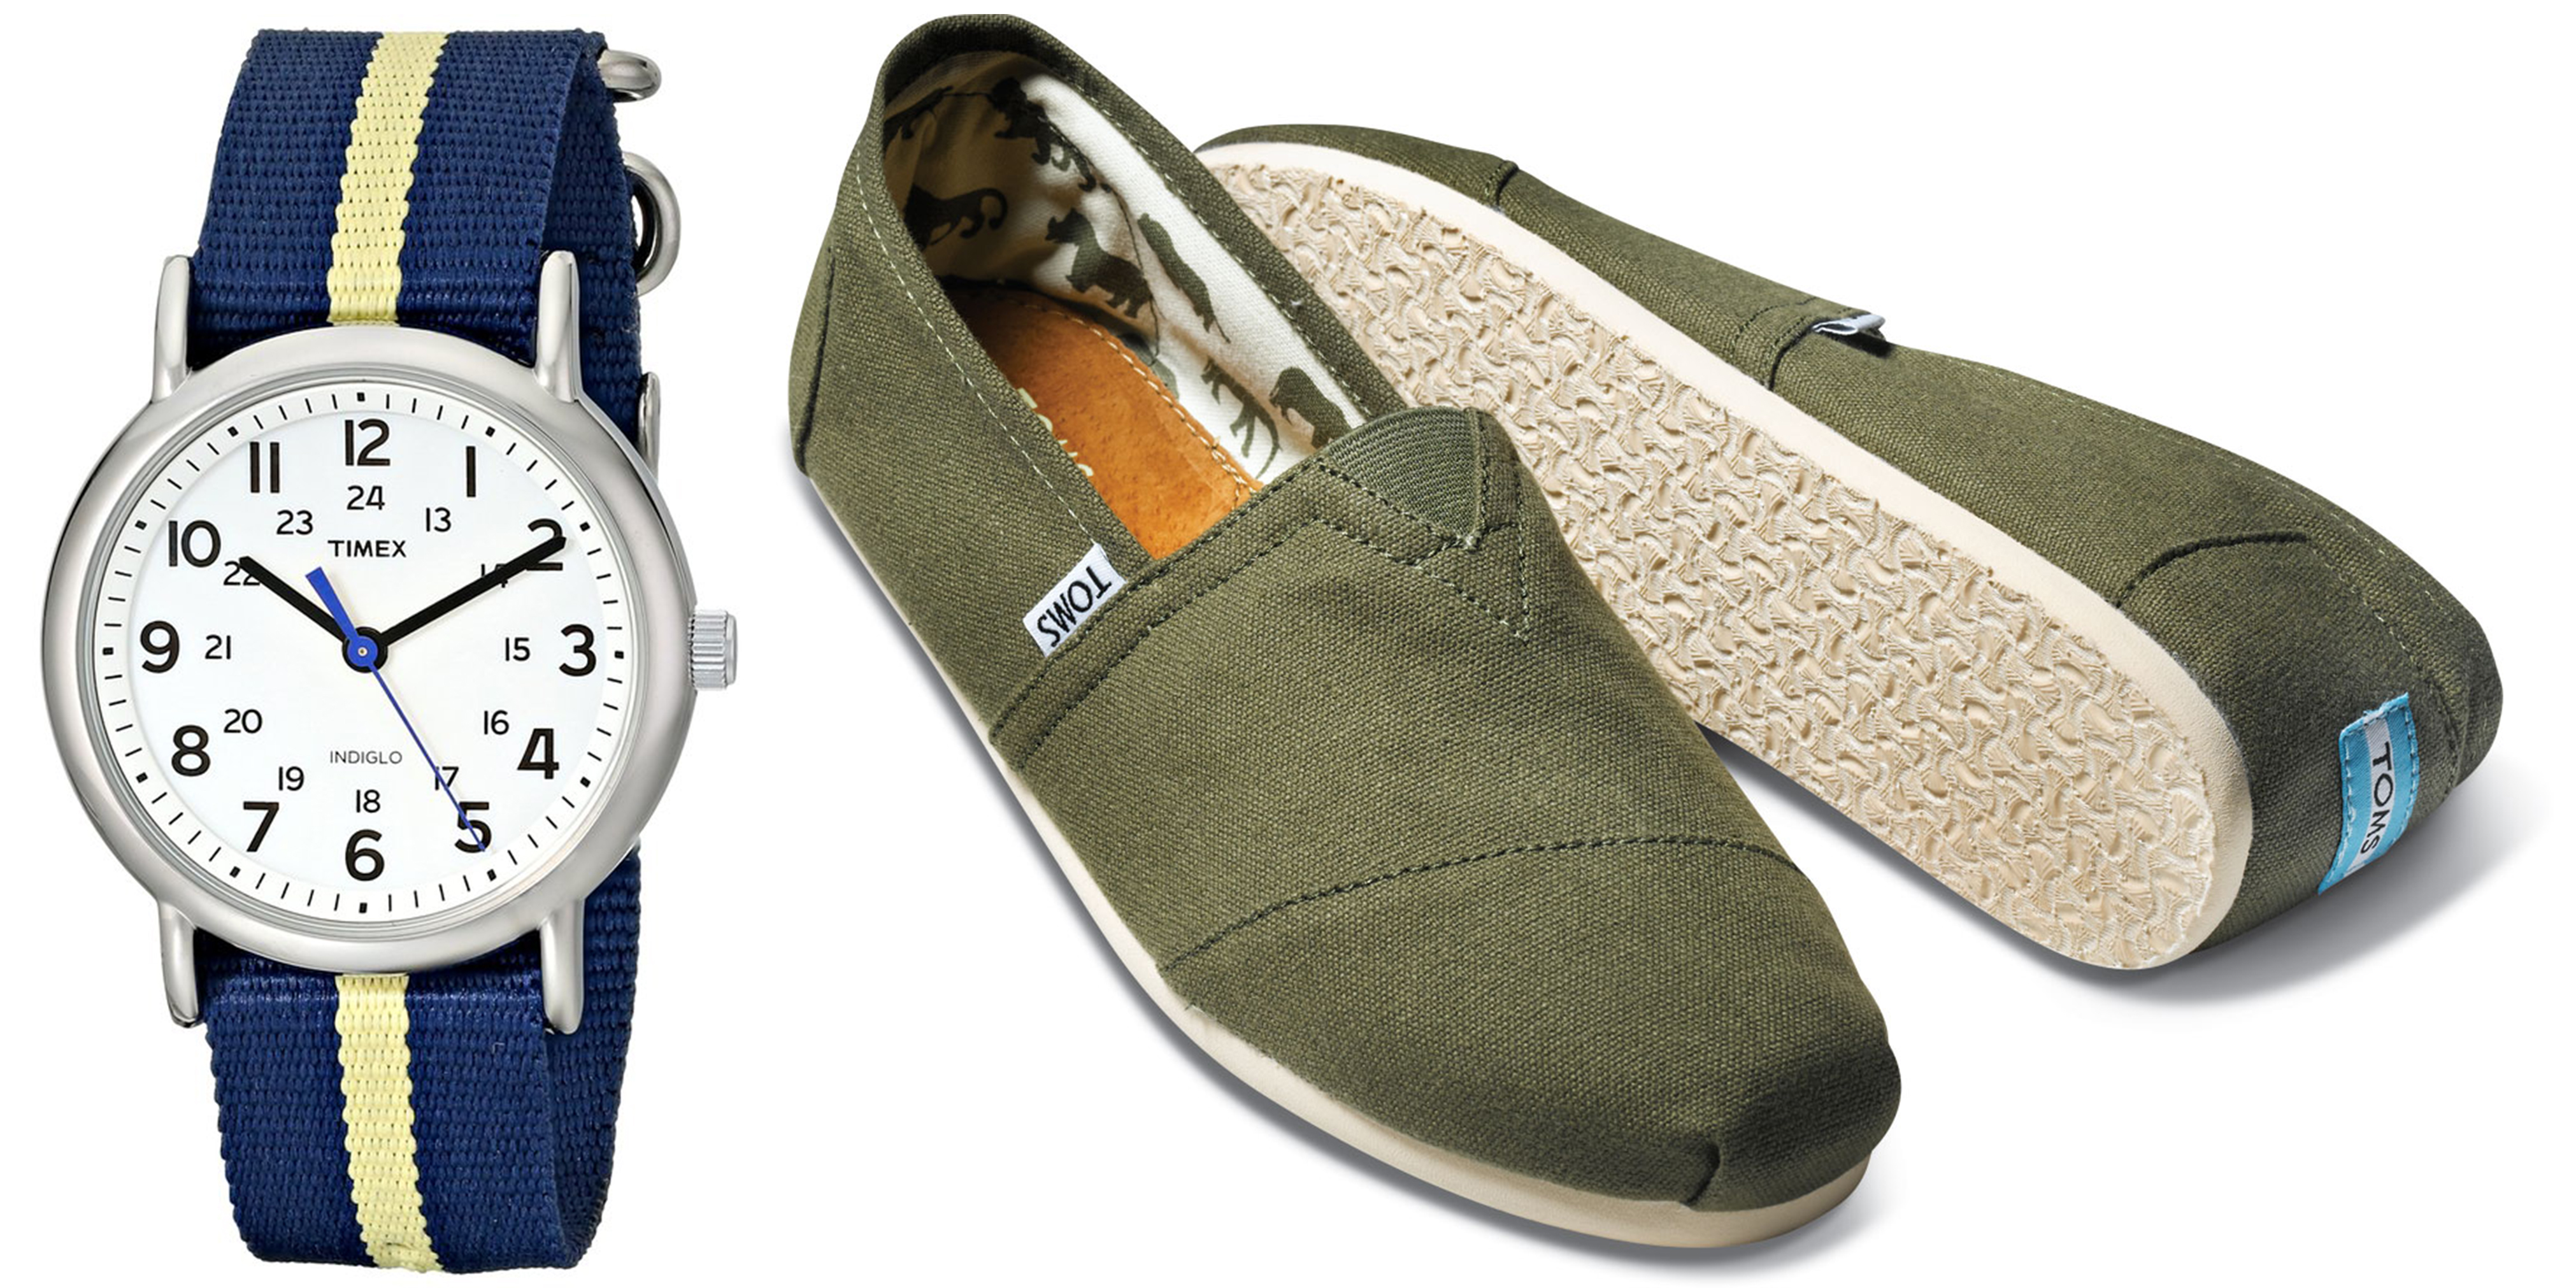 timex-toms-fashion-9to5toys